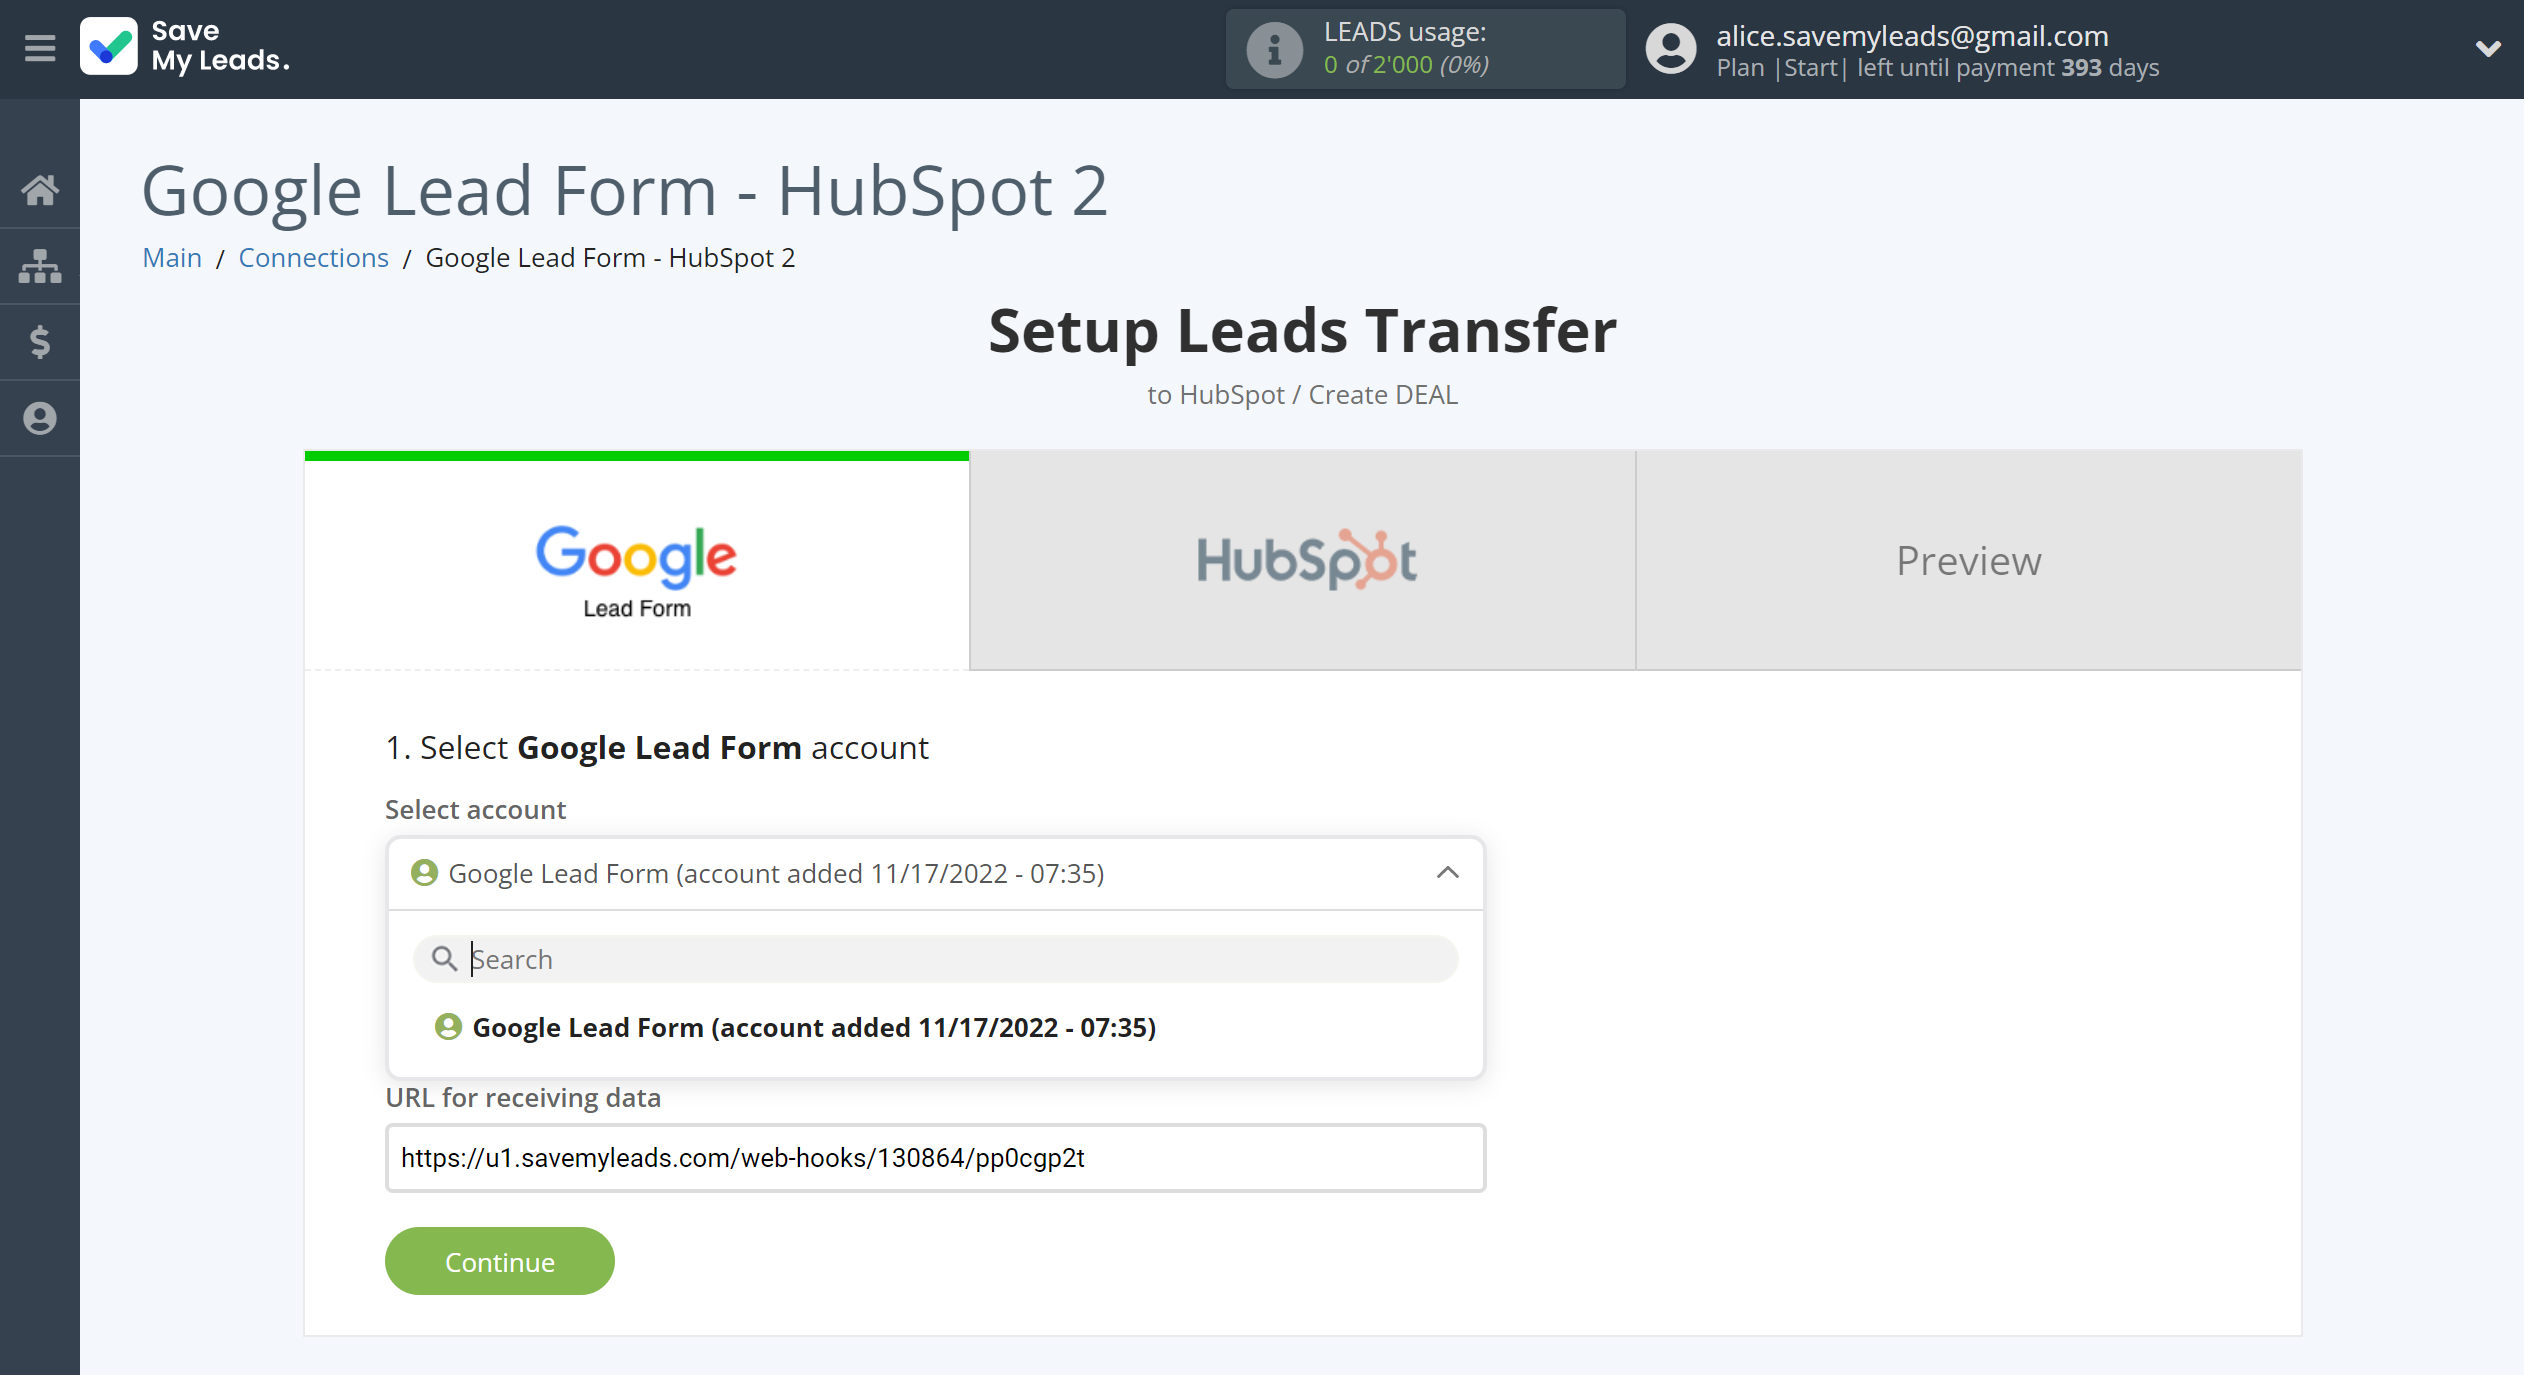 How to Connect Google Lead Form with HubSpot Create Deal | Data Source account selection